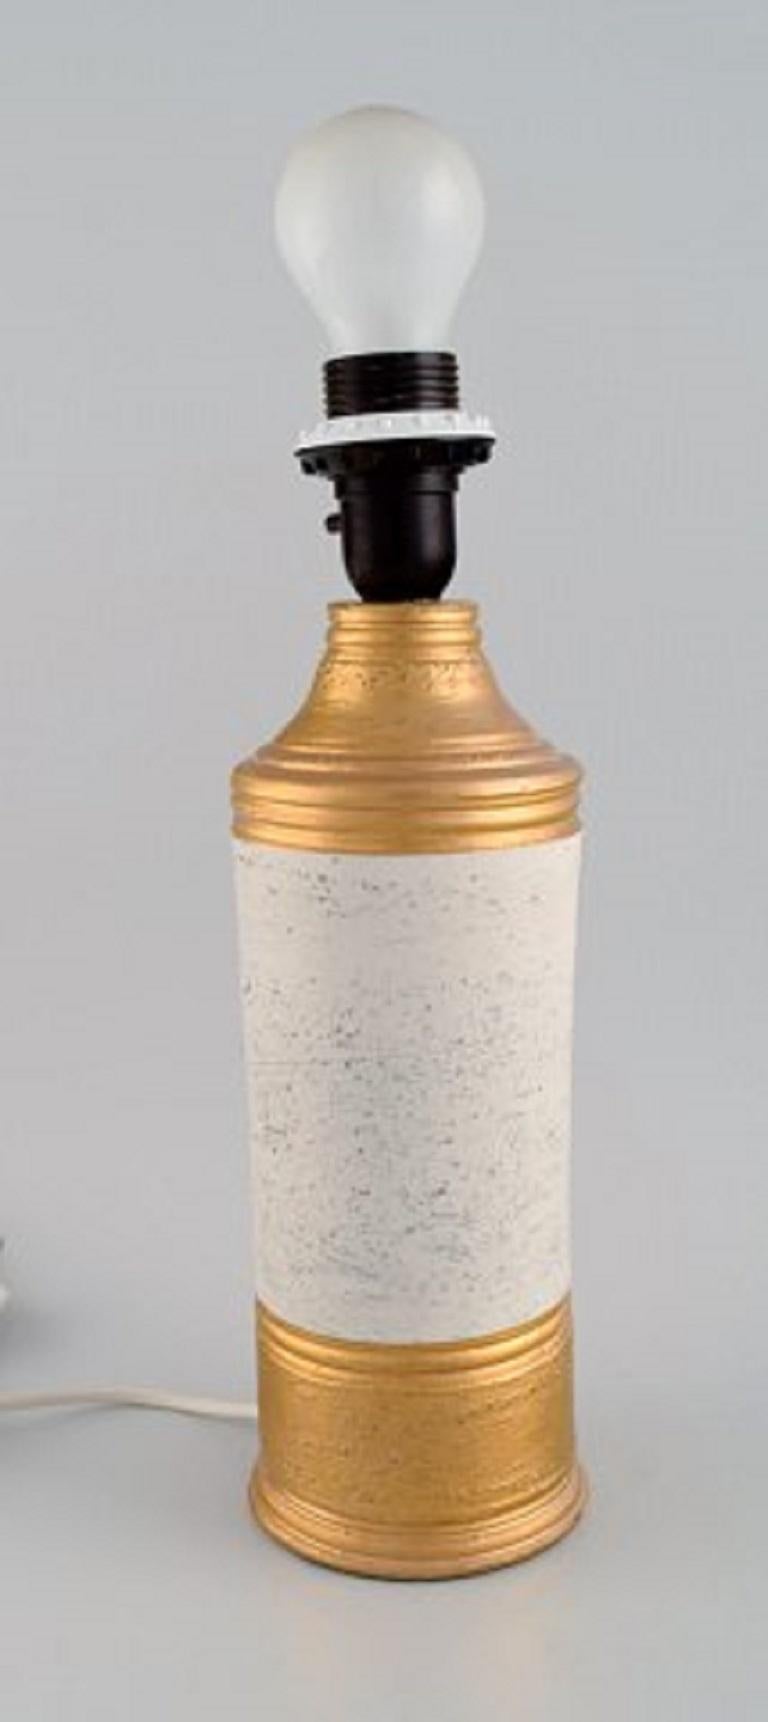 Bitossi for Bergboms, Sweden. Two table lamps in glazed stoneware. 
Beautiful glaze in sand and gold shades. 1960s.
Measures: 28 x 11 cm (ex socket)
In excellent condition.
Label.